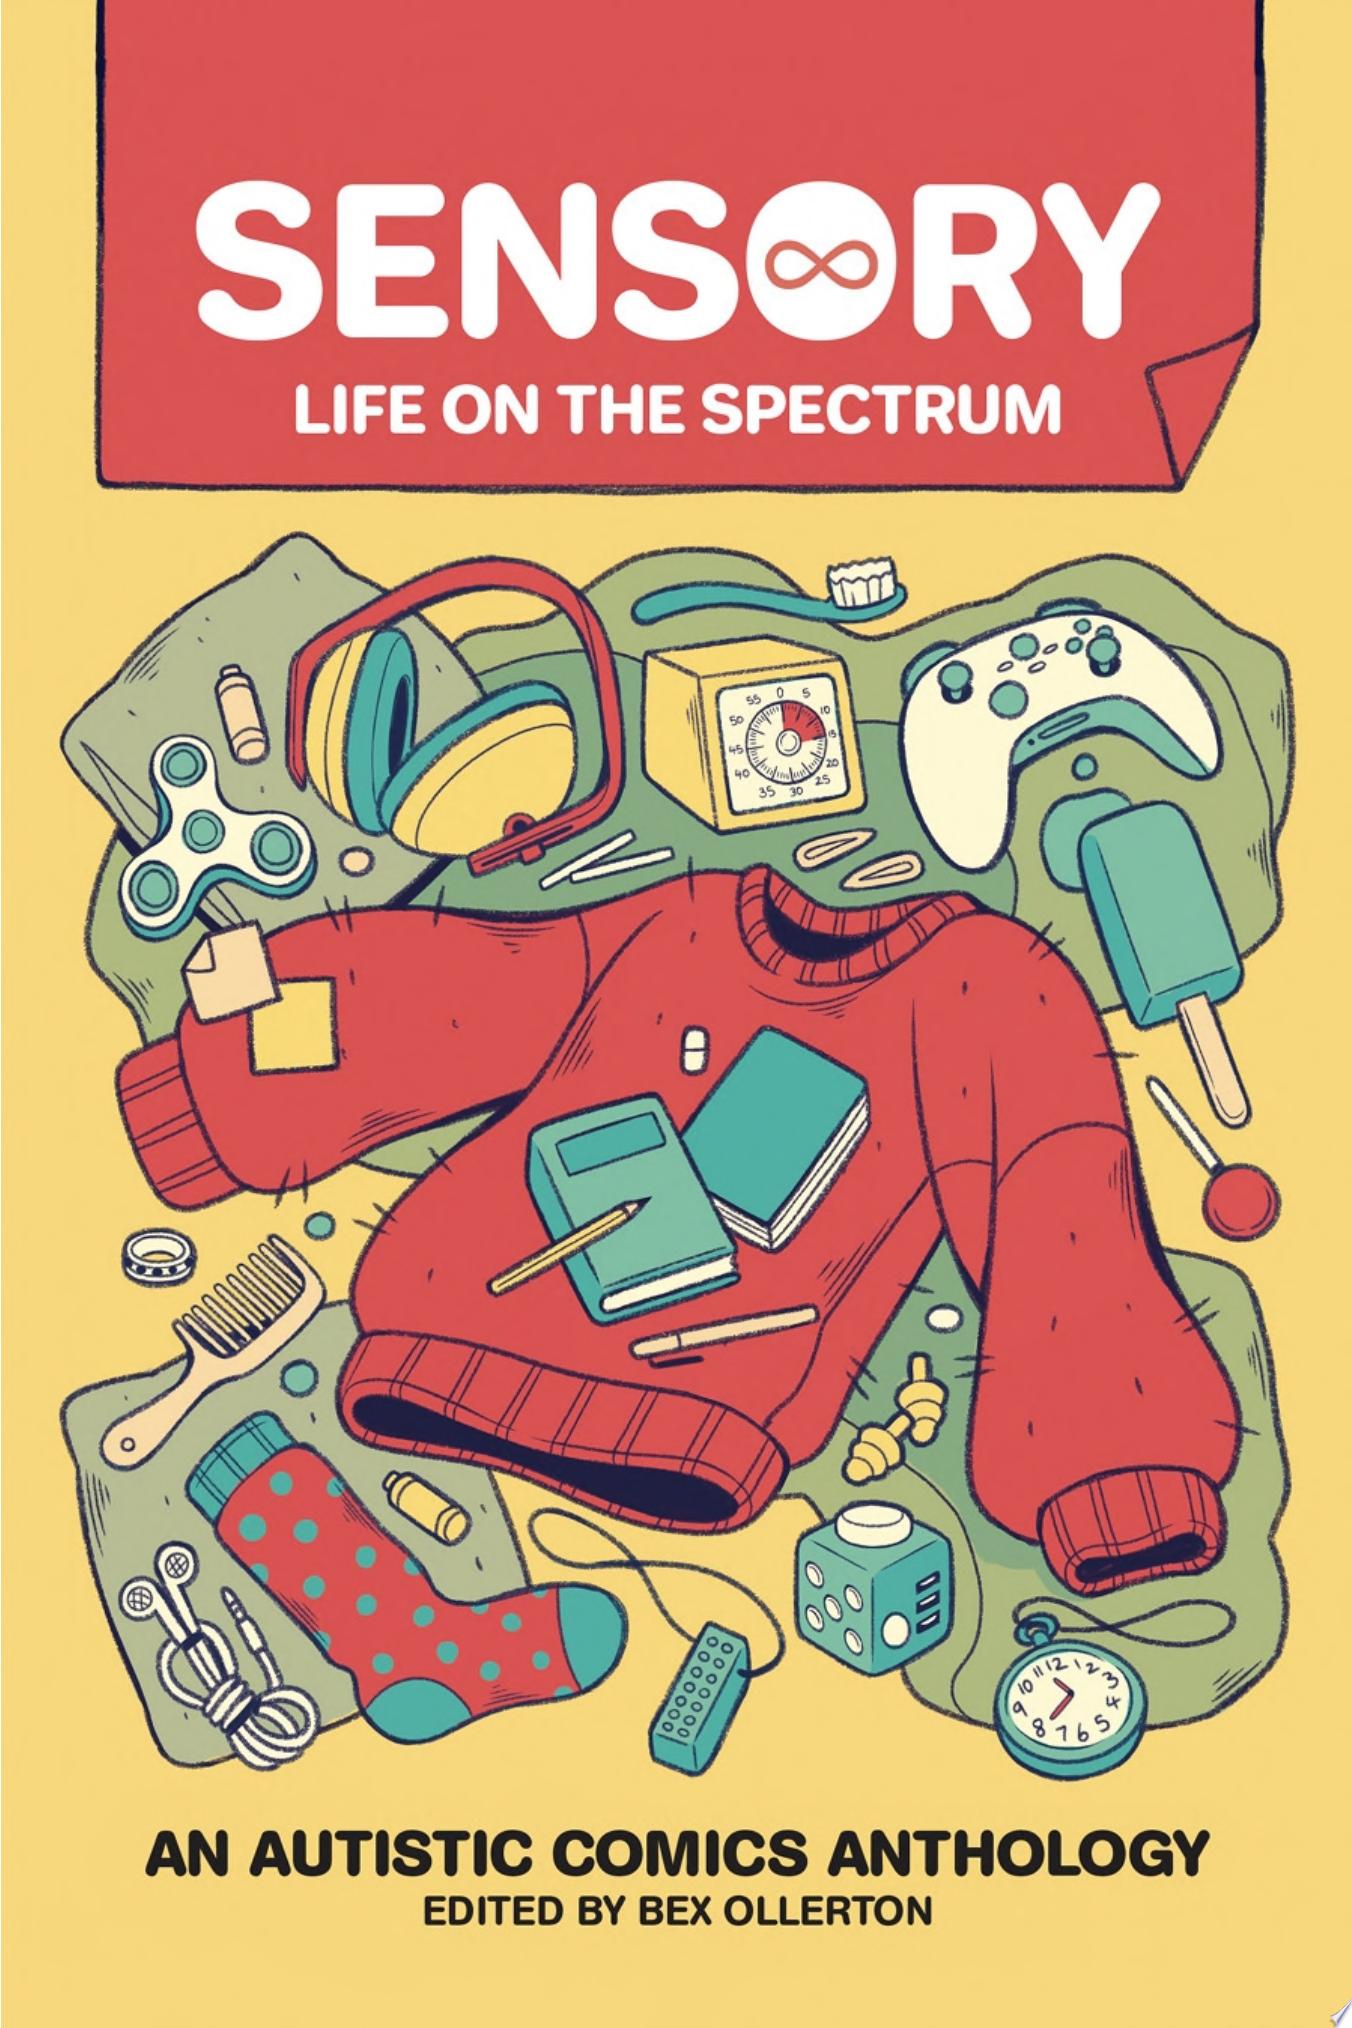 Image for "Sensory: Life on the Spectrum"